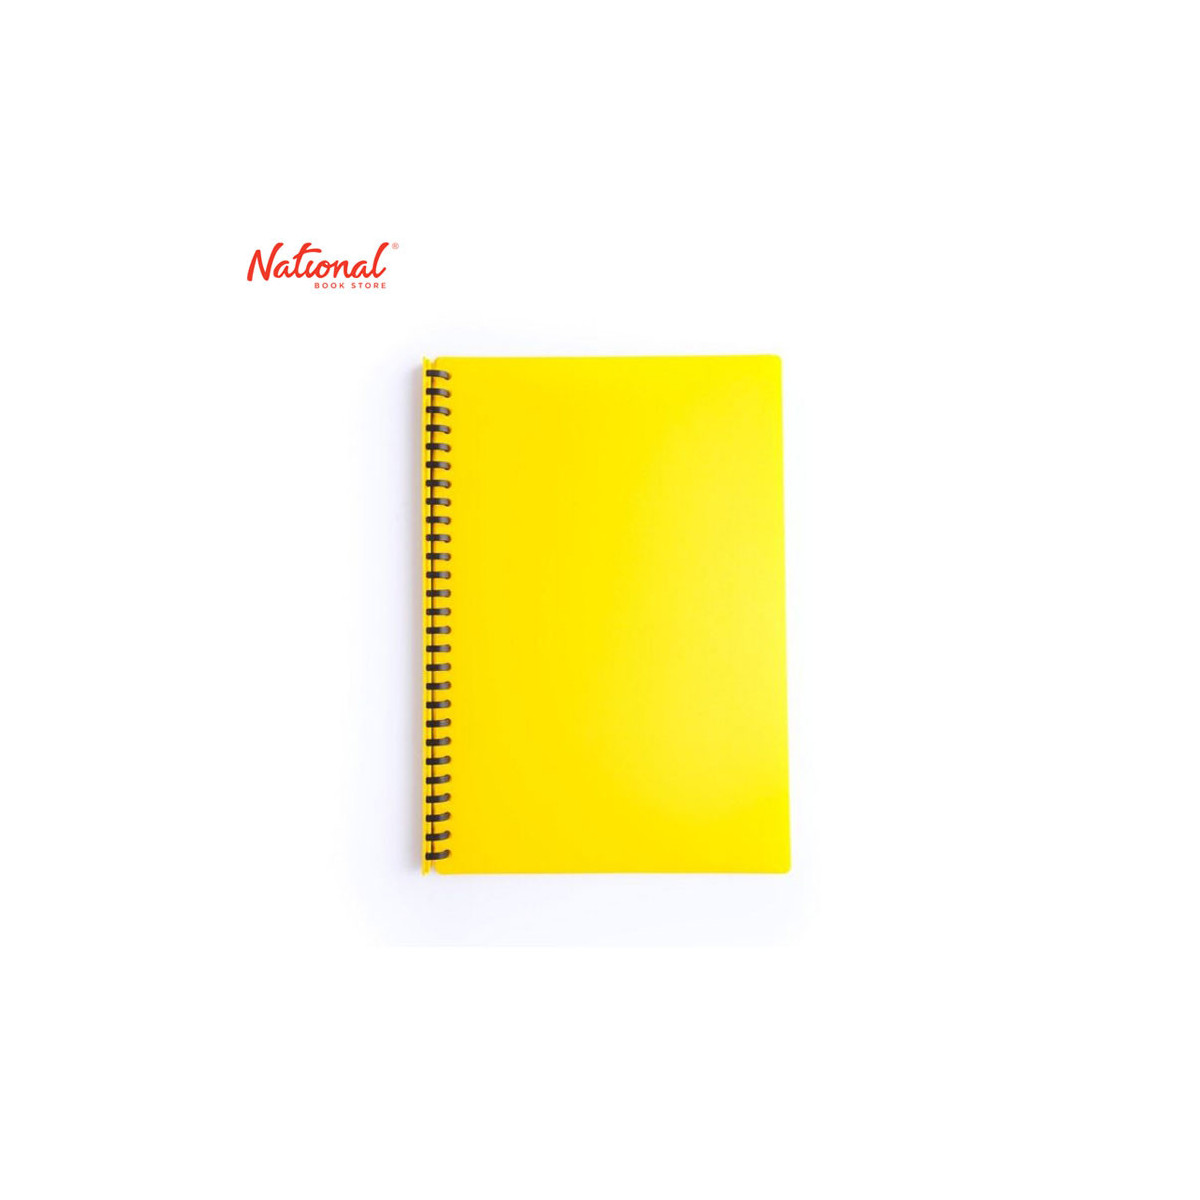 EVO CLEARBOOK REFILLABLE LONG 20SHEETS 27HOLES NEON YELLOW